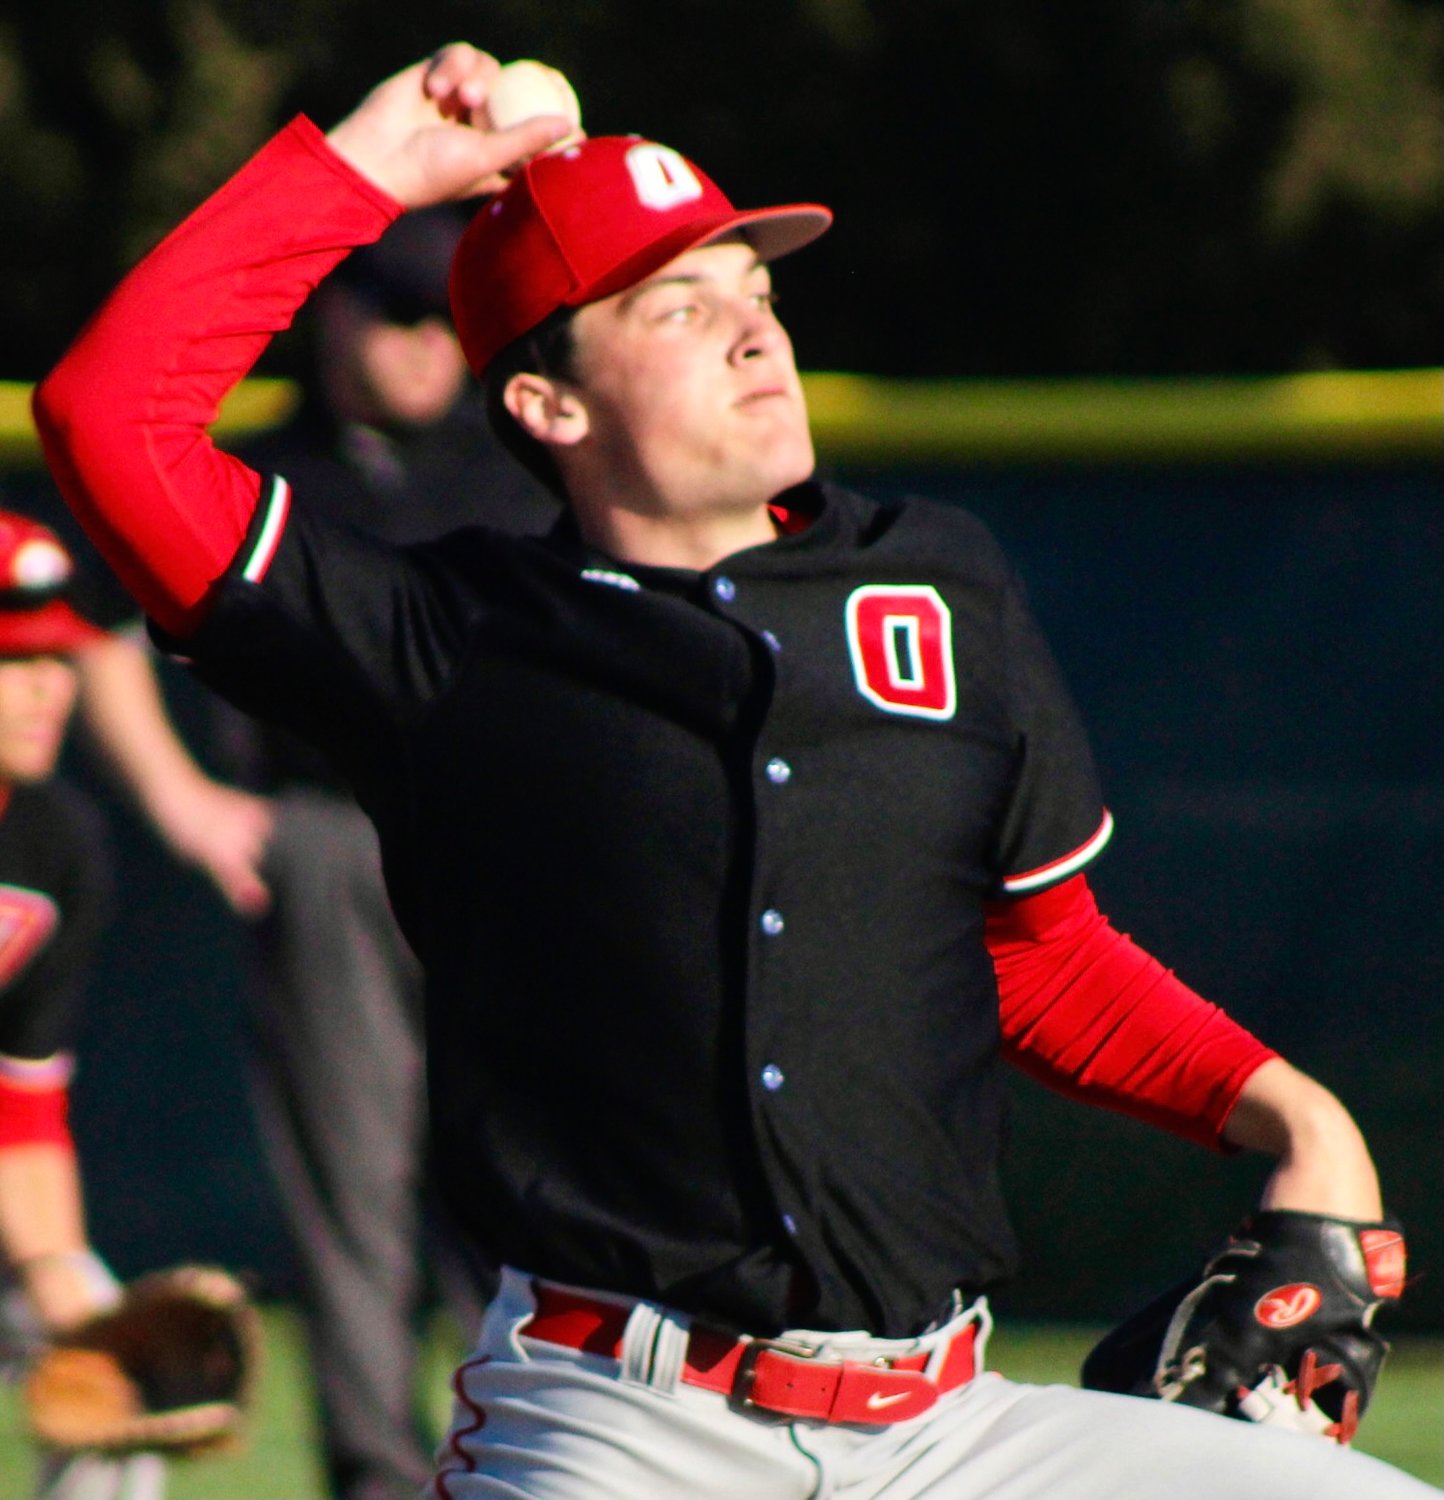 OZARK'S RYAN WOOD eyes a delivery home.